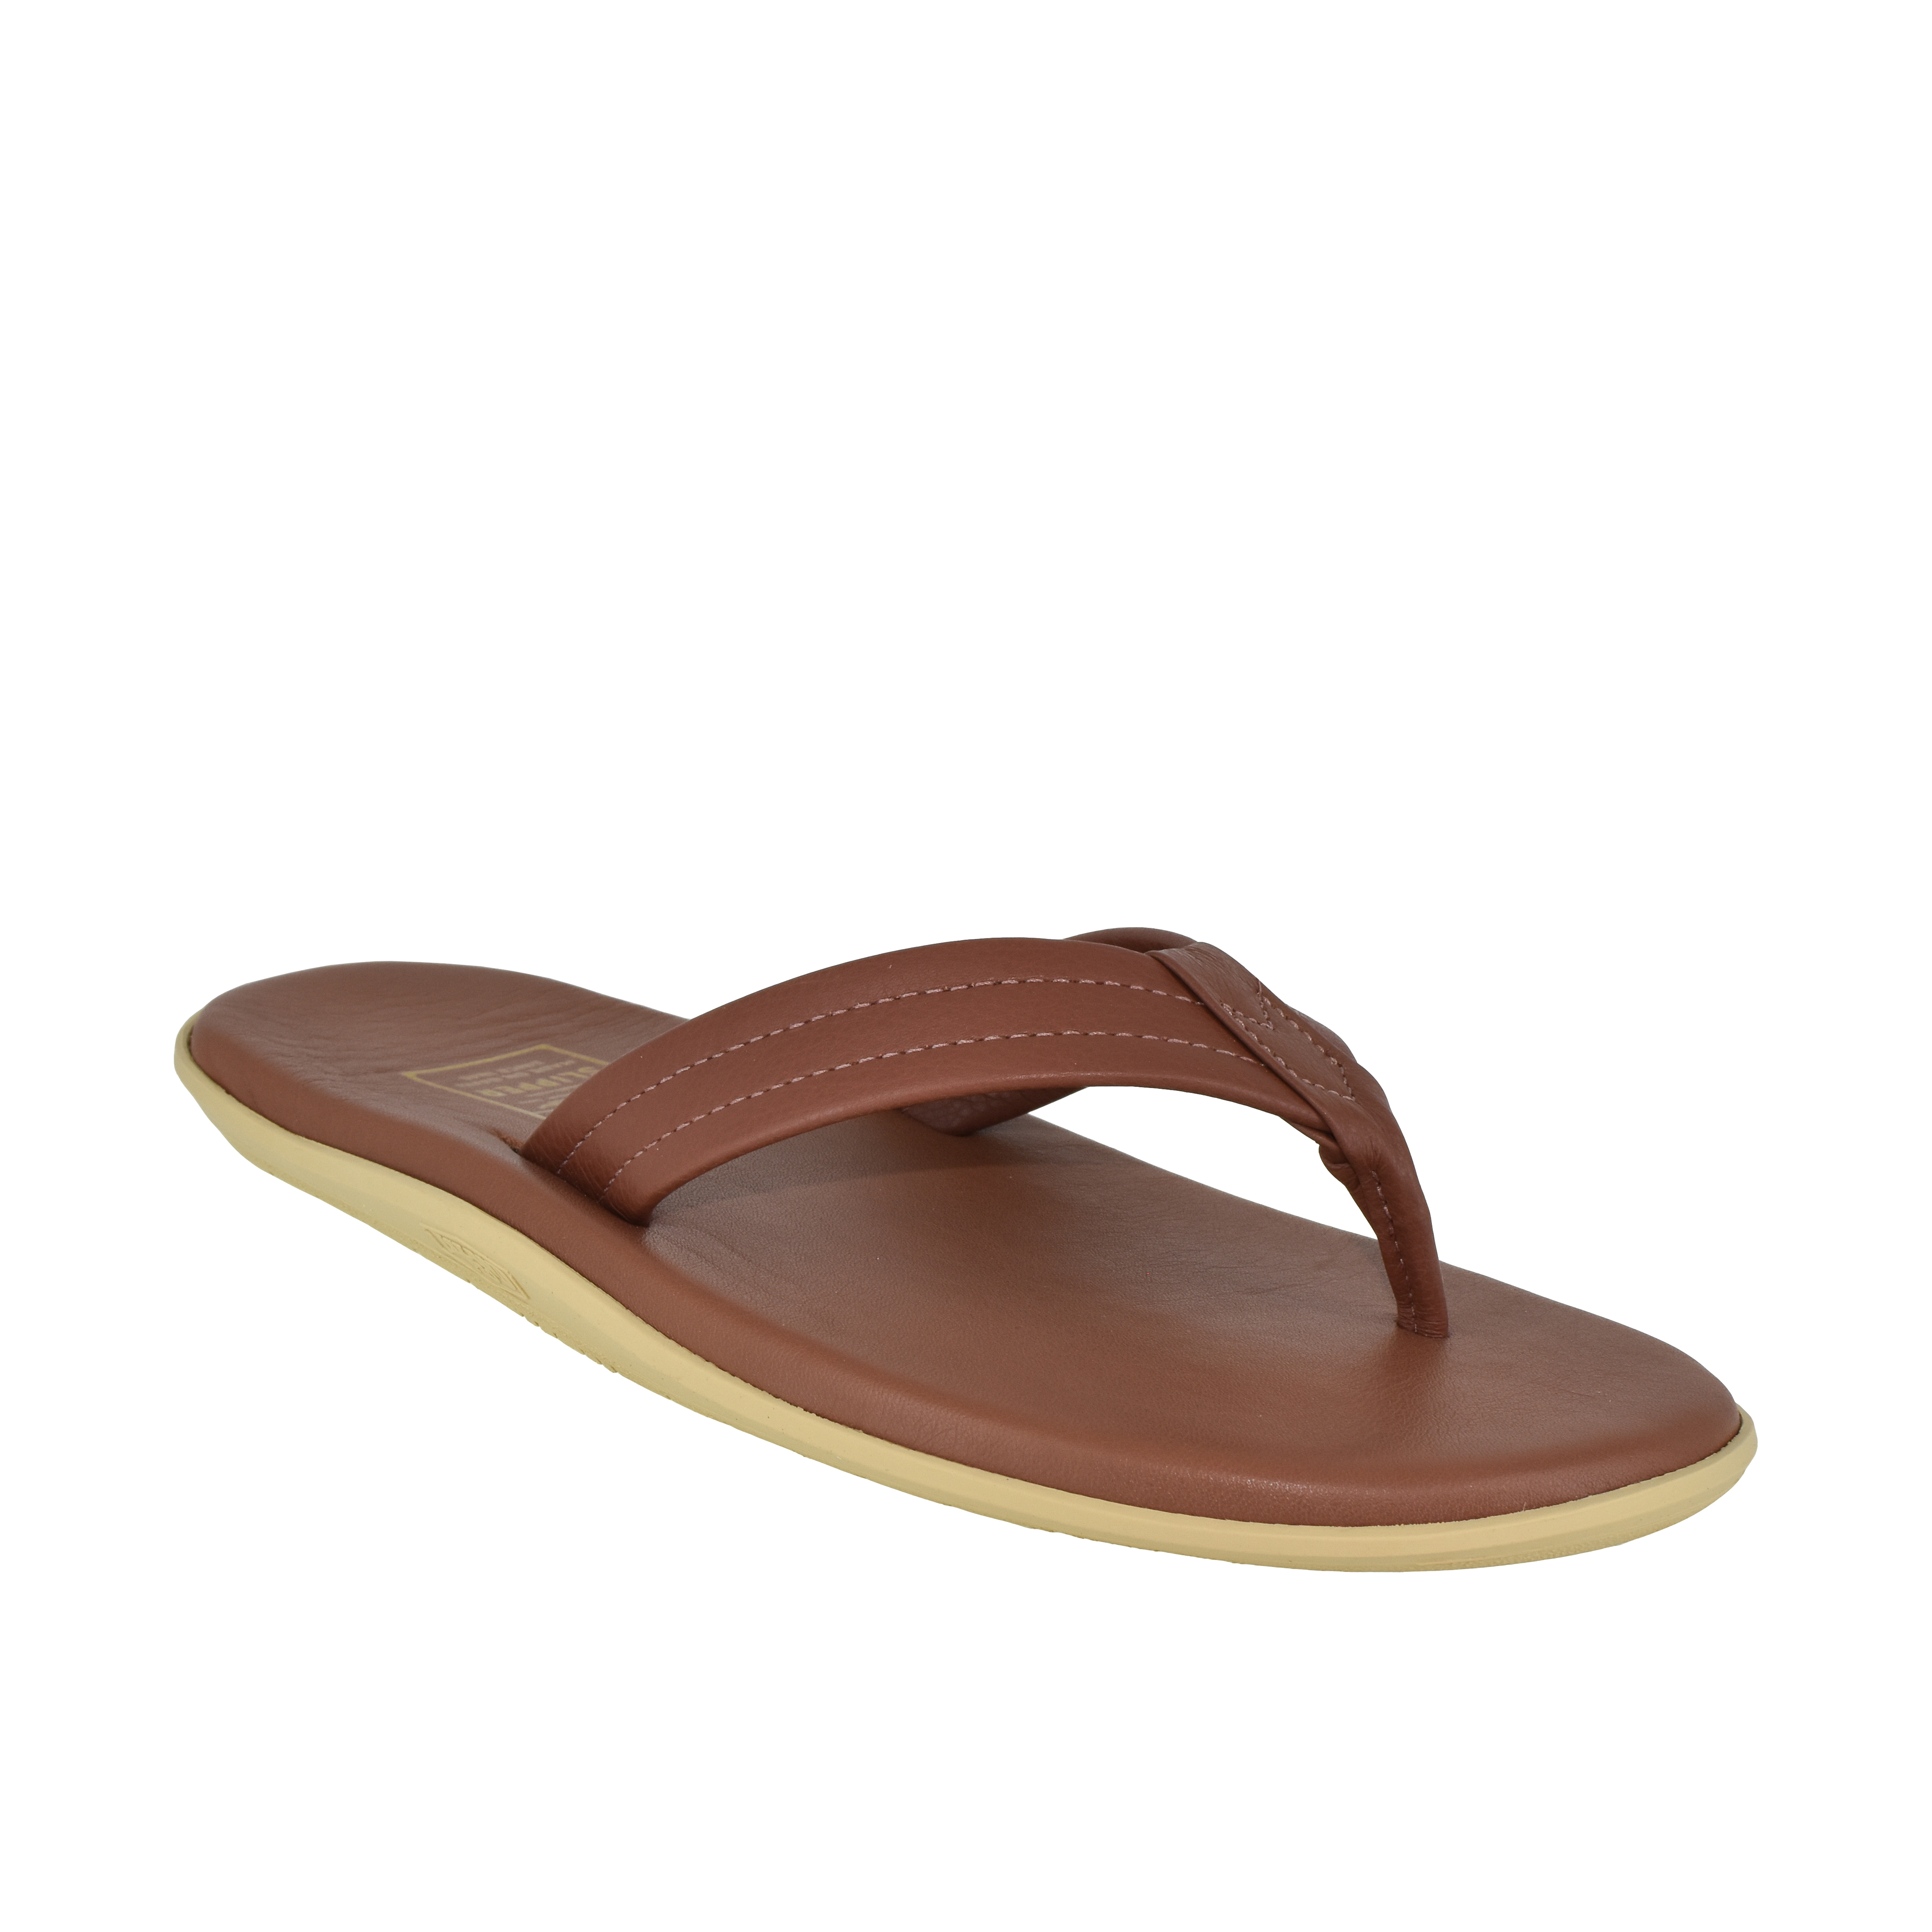 Island Slipper Classic Leather Flip Flop - Whiskey | Sandals